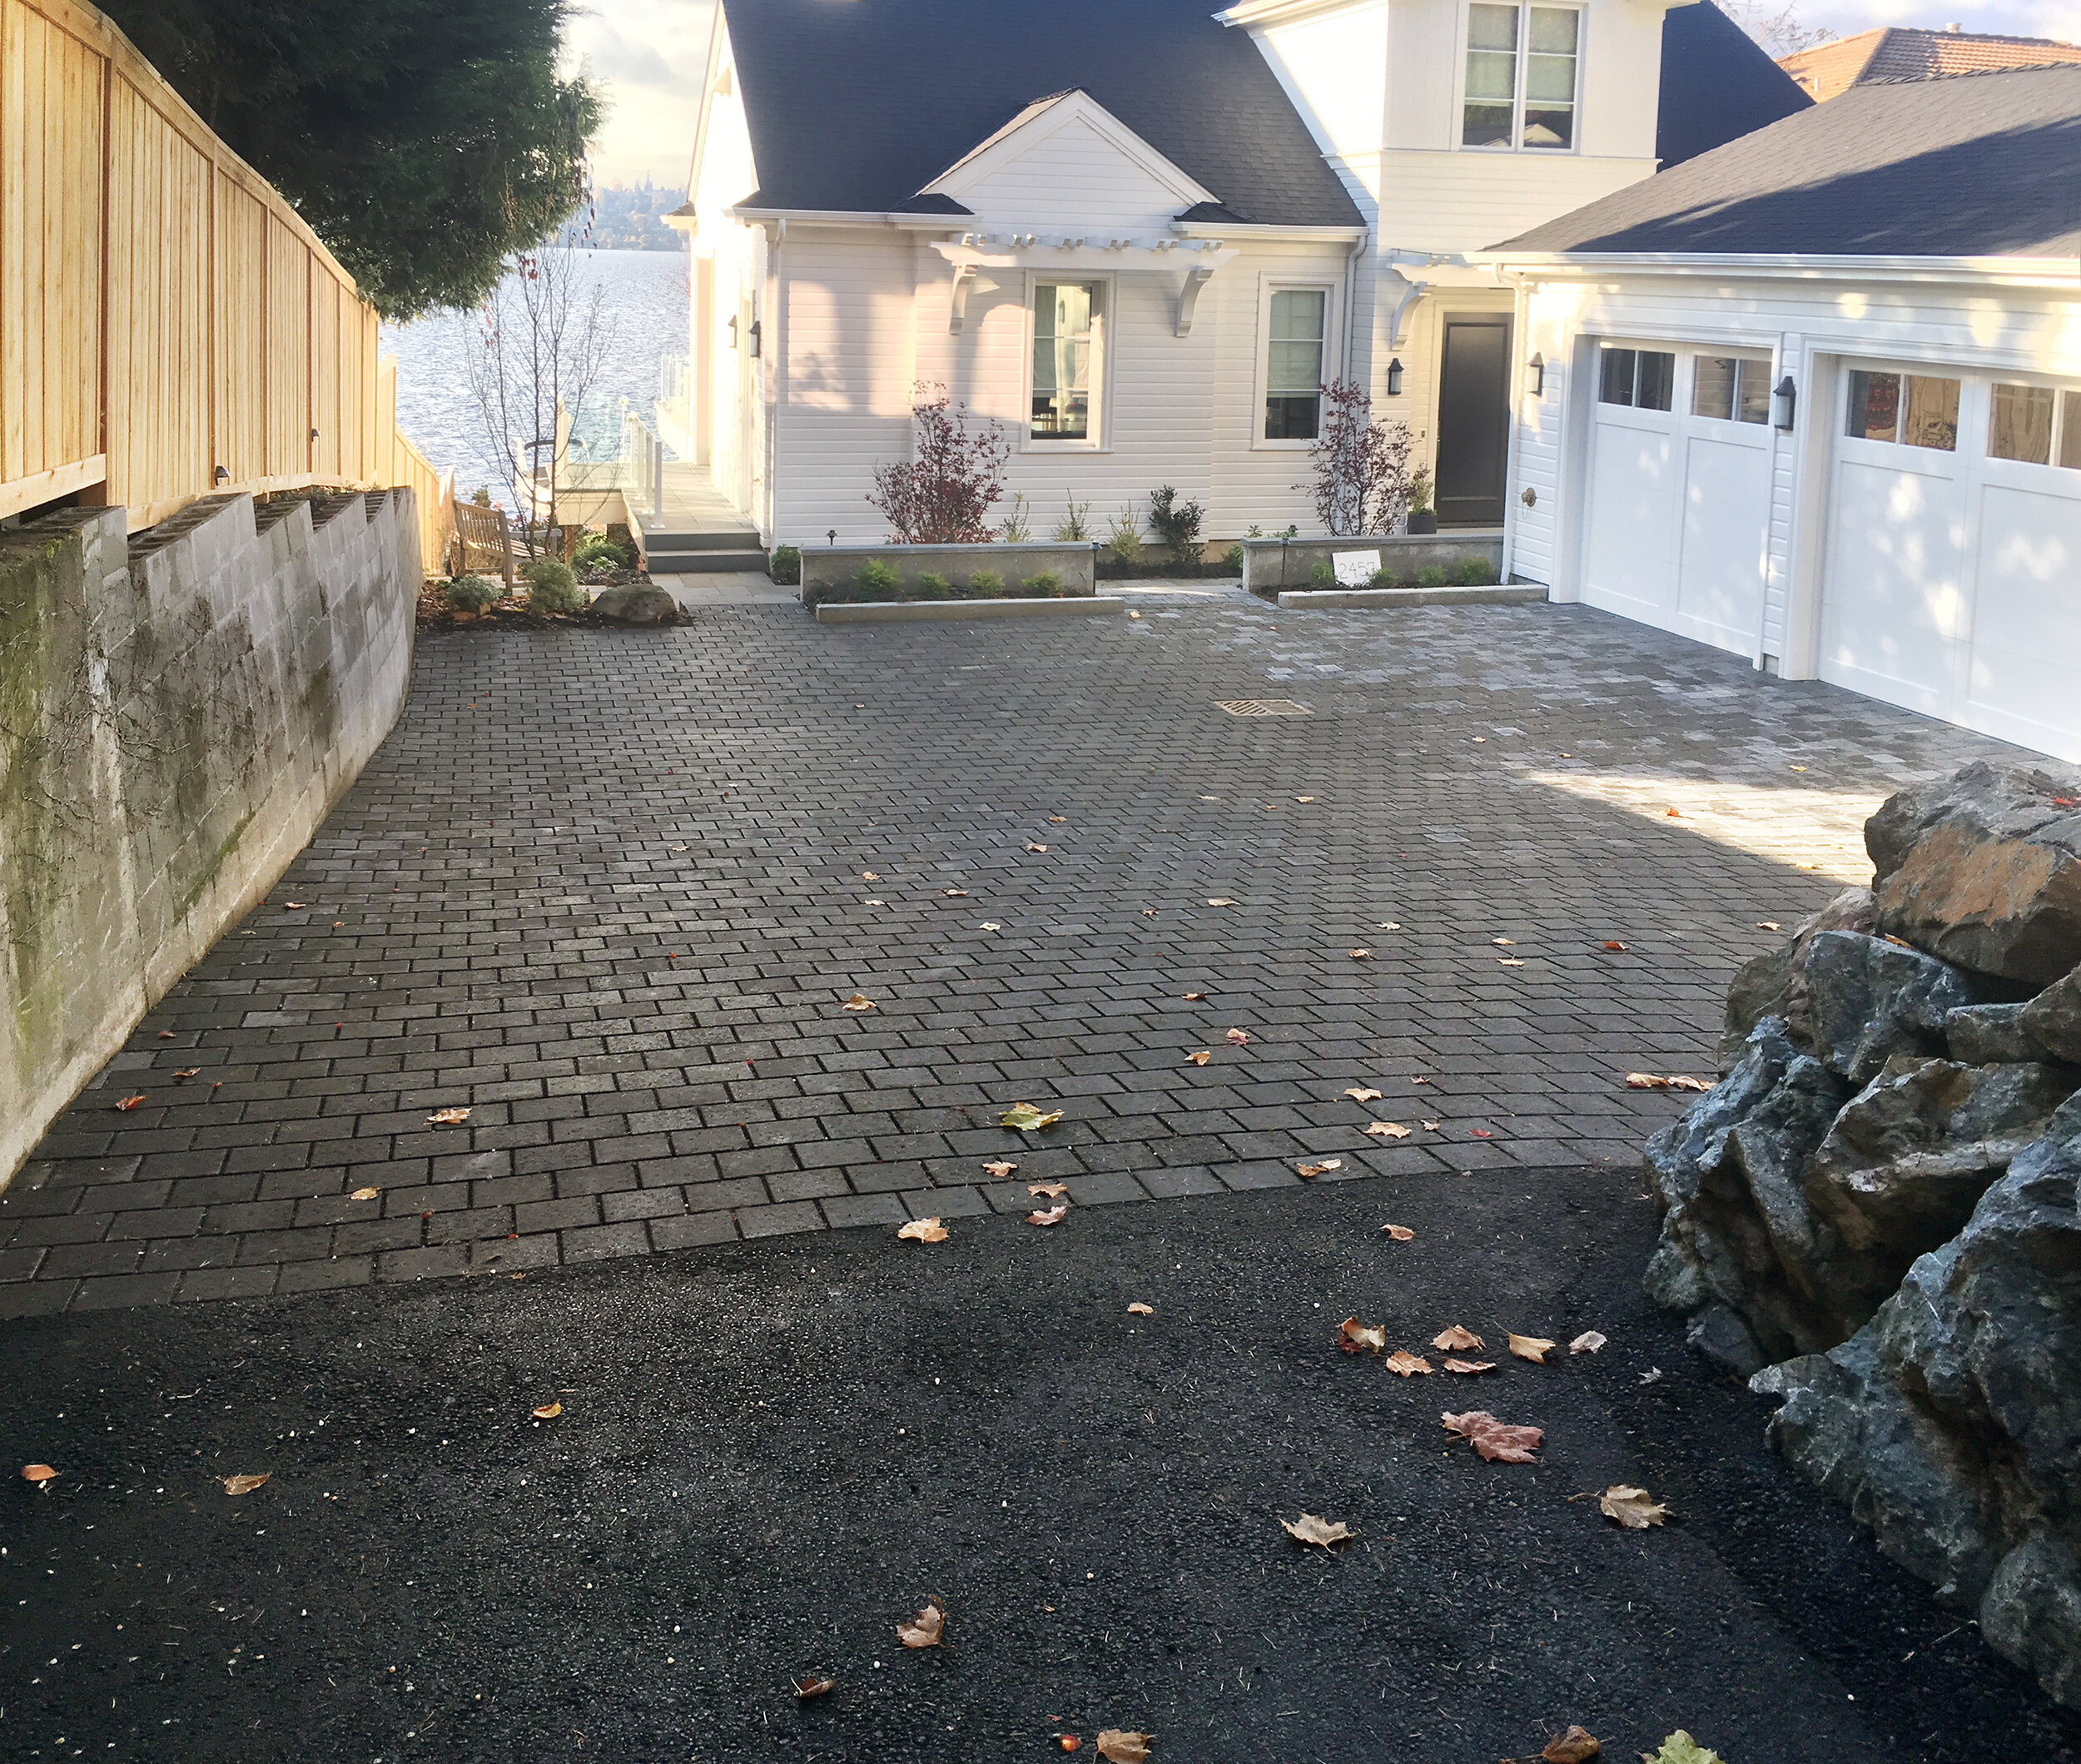 P4: Permeable Paver Driveway Set in a Running Bond